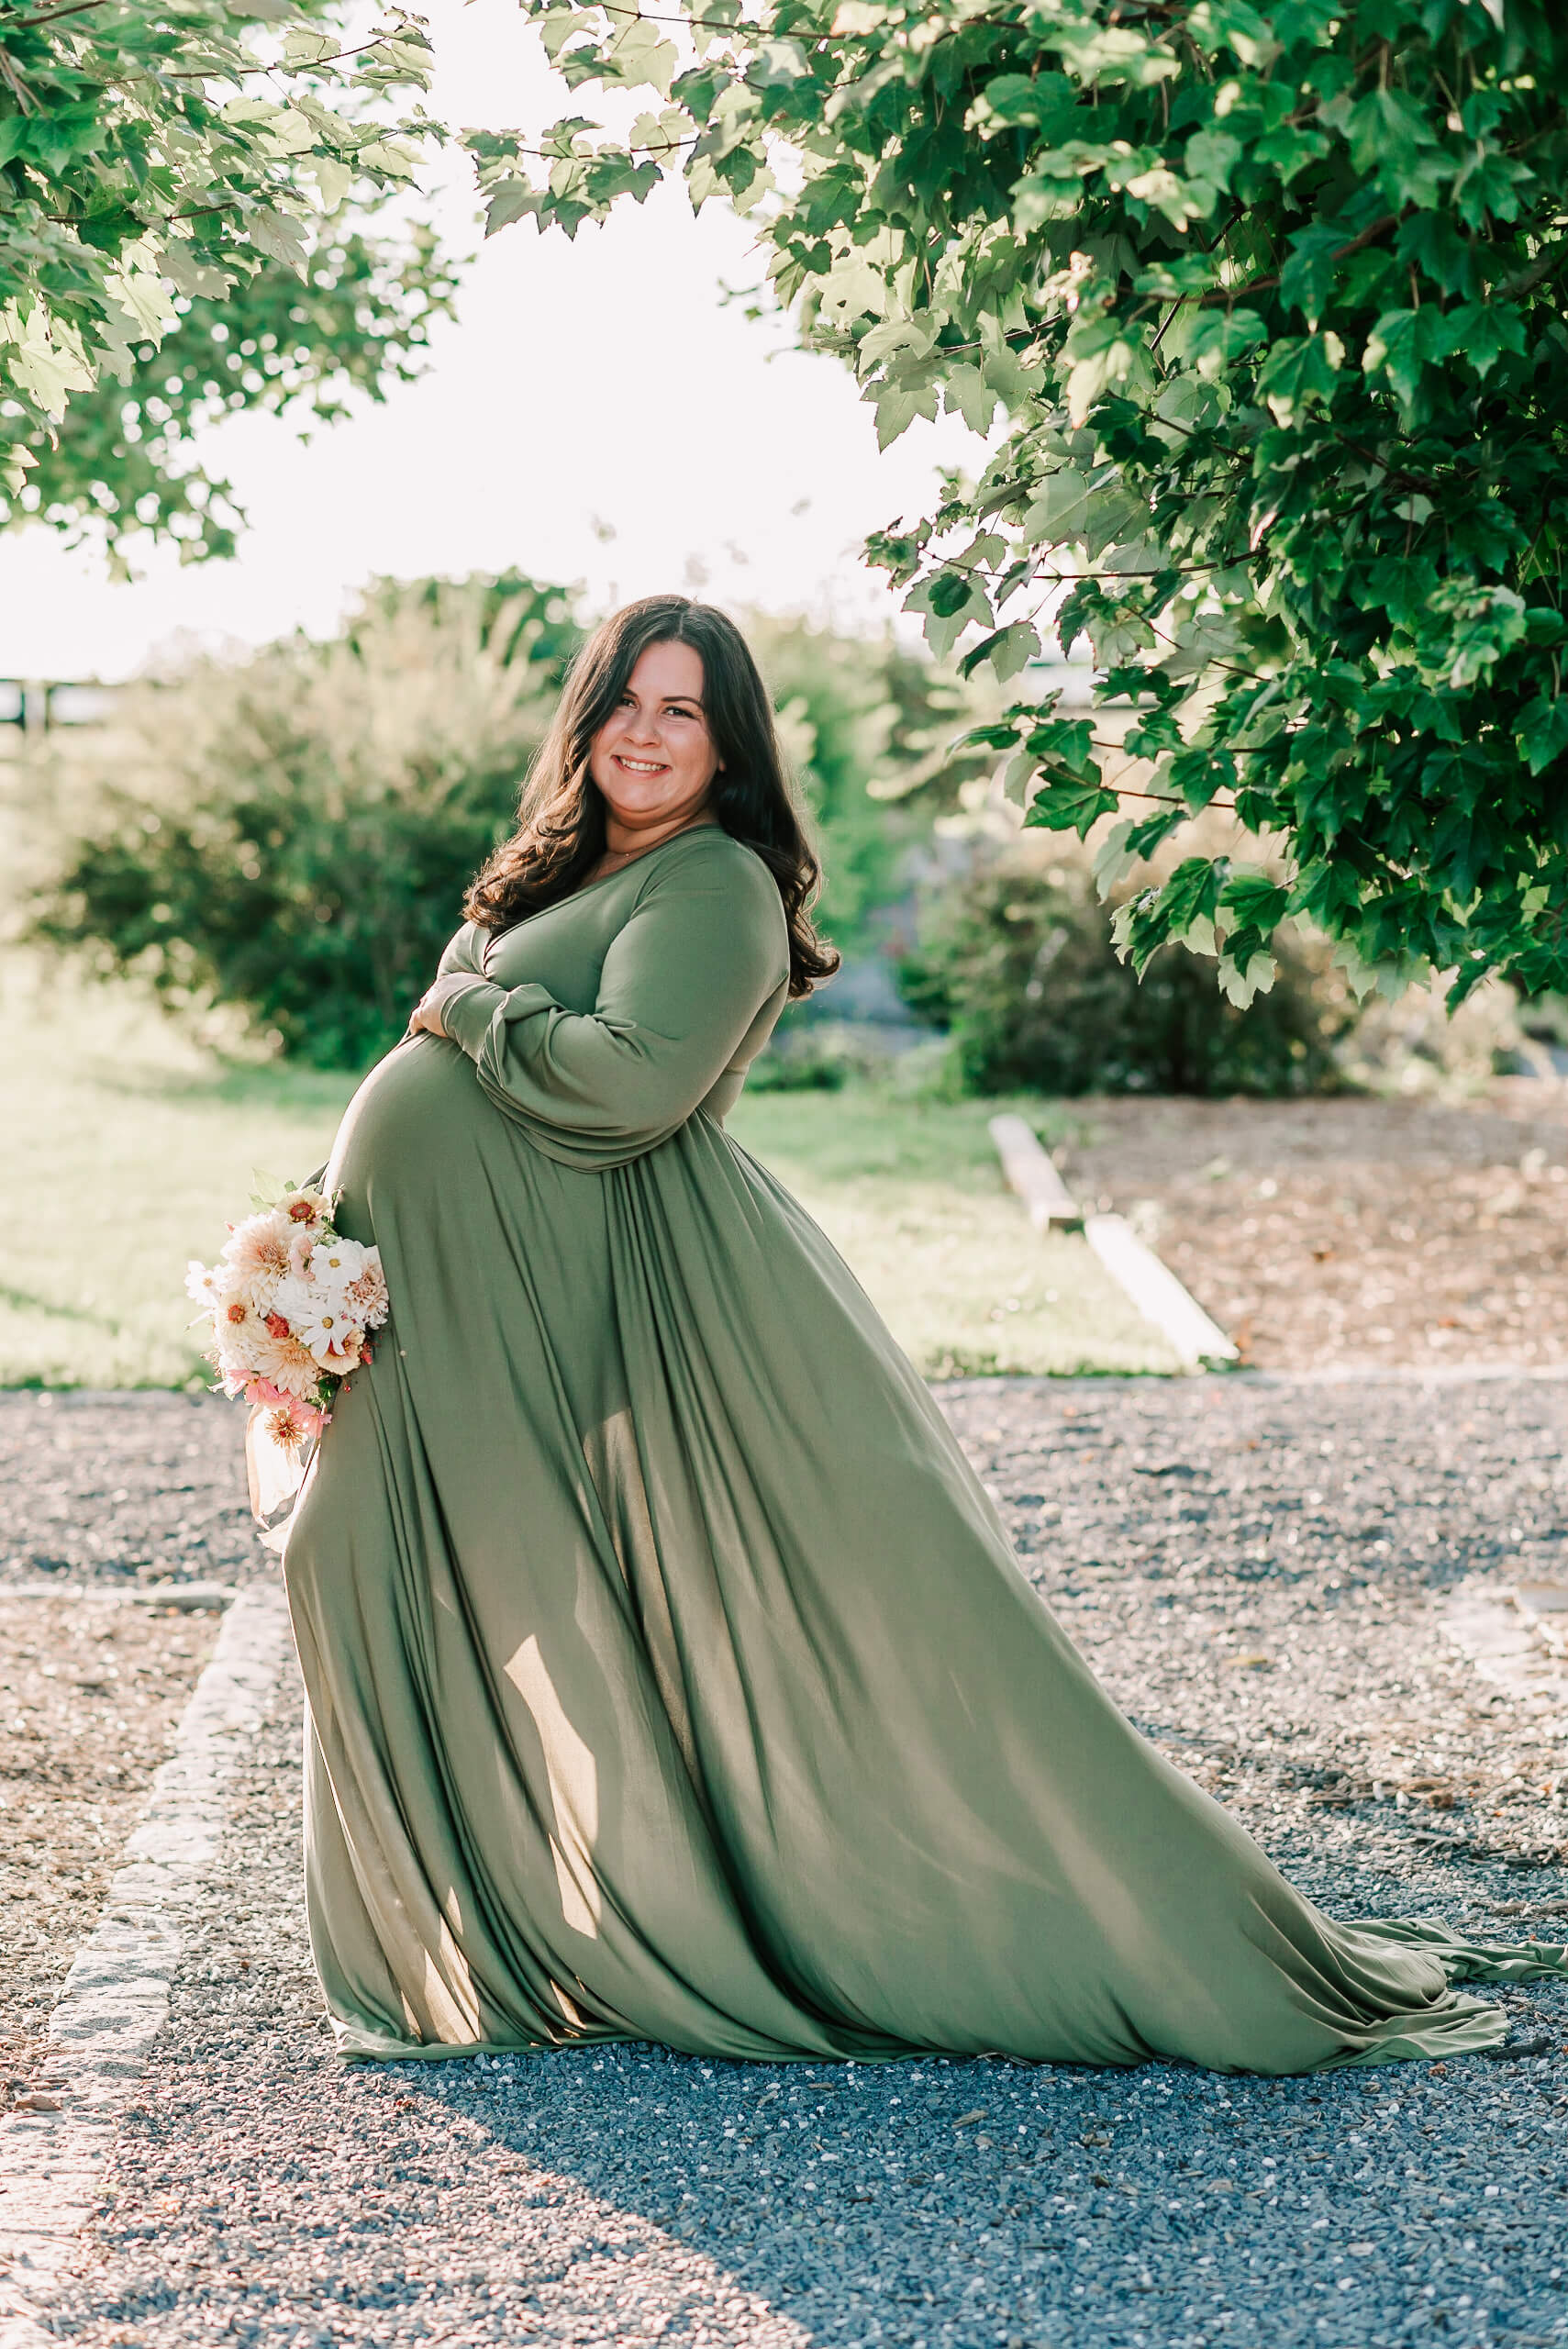 A mom to be stands in a park wearing a green maternity gown blowing in the wind and holding a bouquet of flowers after visiting community of hope birth center